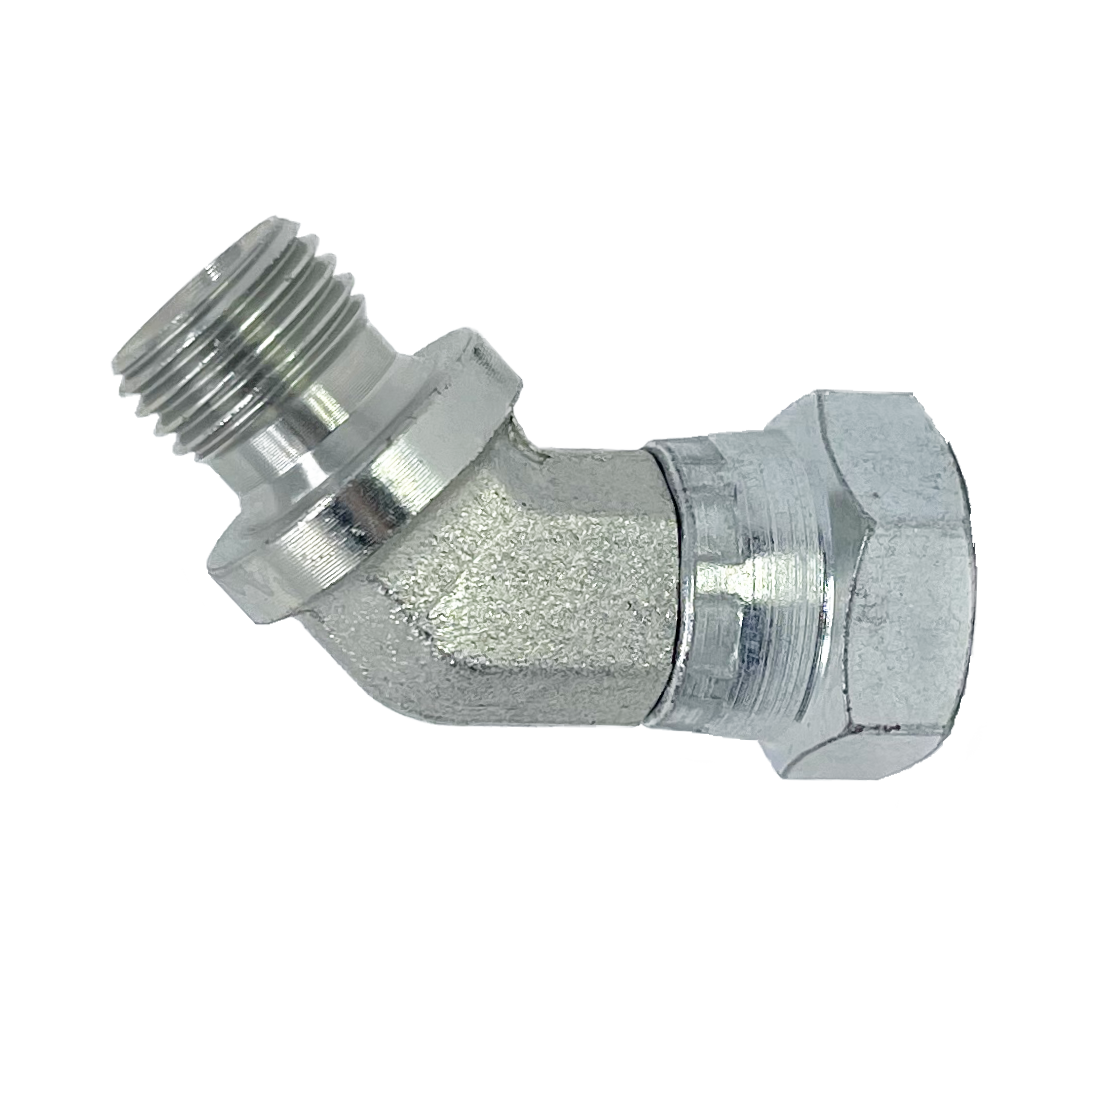 9048-04-04 : Adaptall 45-Degree Adapter, Male 0.25 (1/4") BSPP x Female 0.25 (1/4") BSPP, Carbon Steel